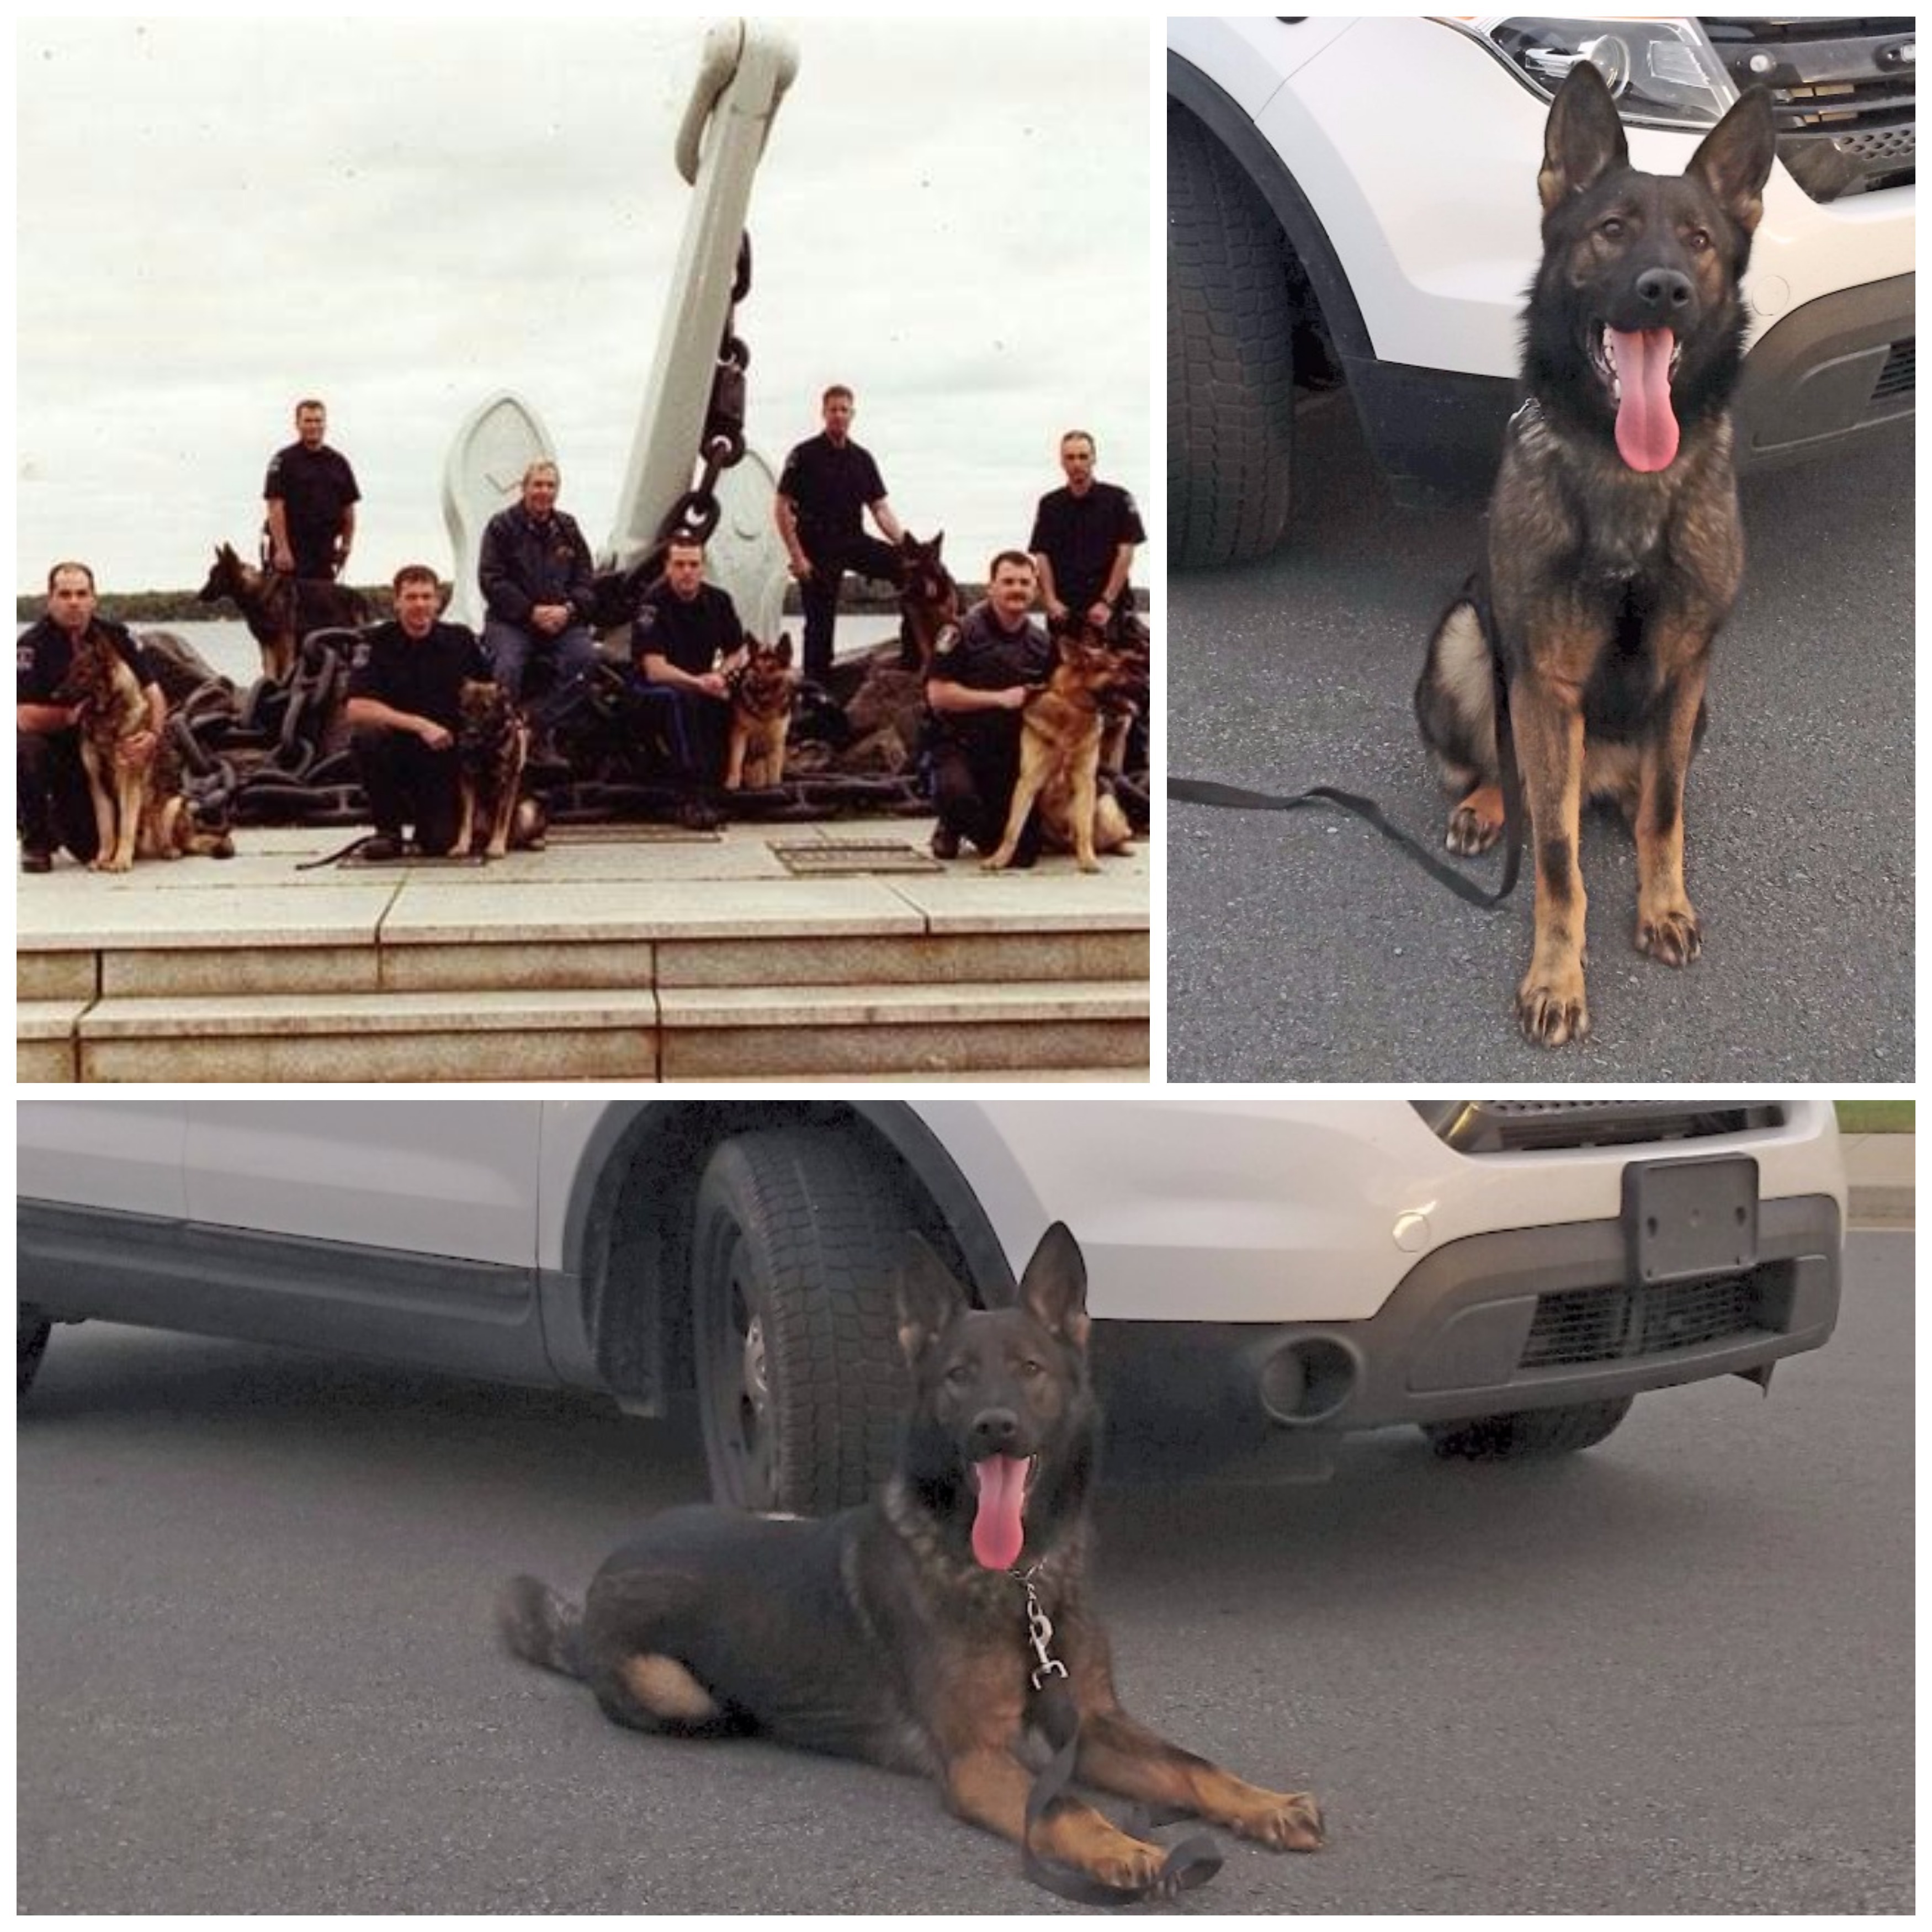 Photos of Morgan and Cst. Ron Morgan, who is pictured sitting on the anchor without a dog.